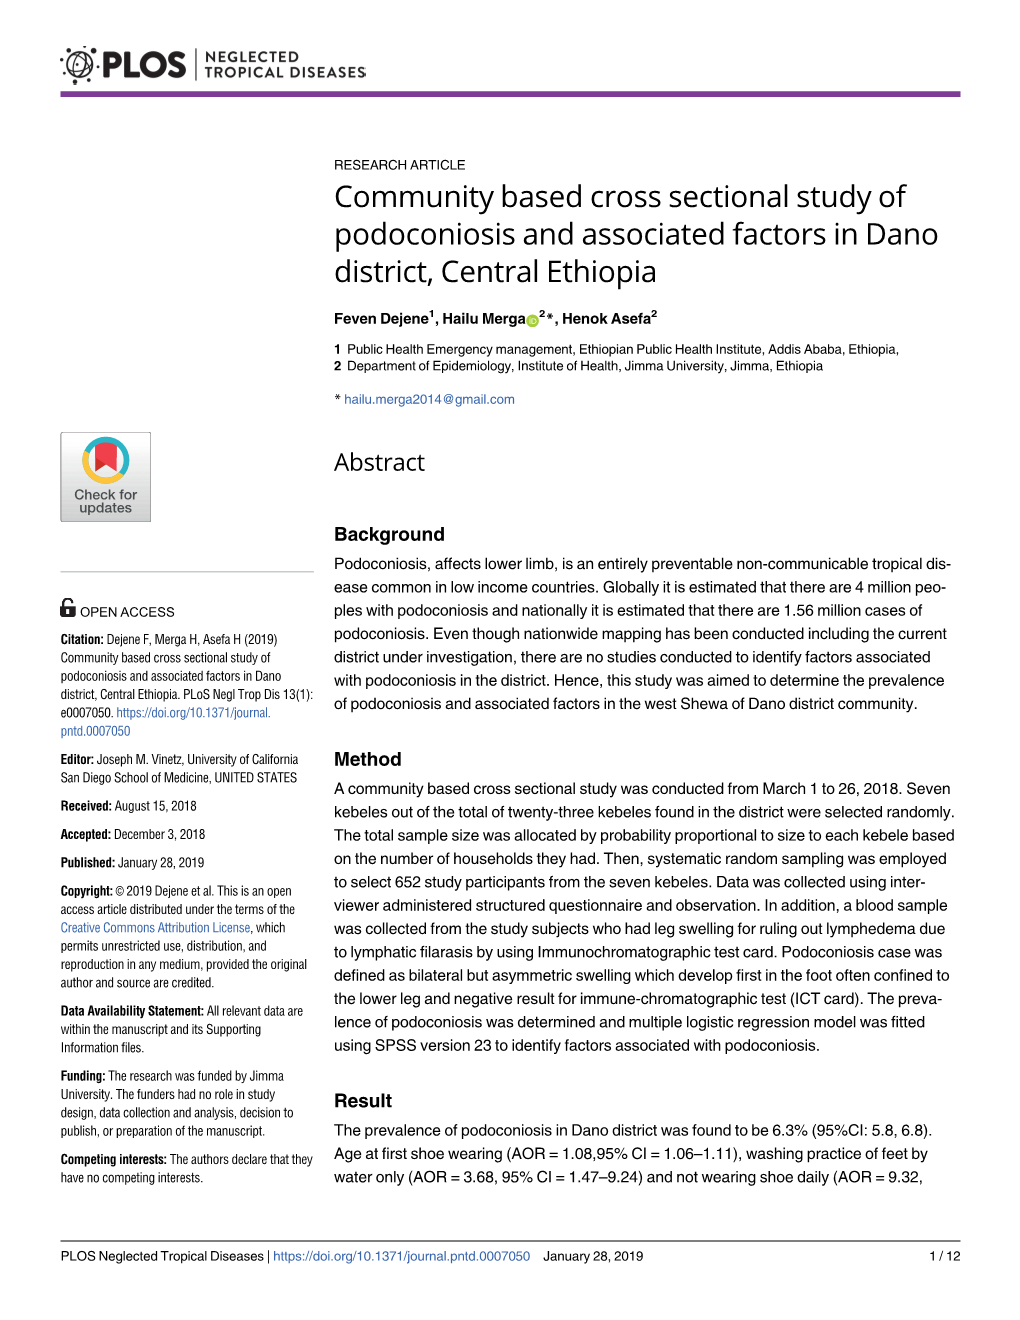 Community Based Cross Sectional Study of Podoconiosis and Associated Factors in Dano District, Central Ethiopia